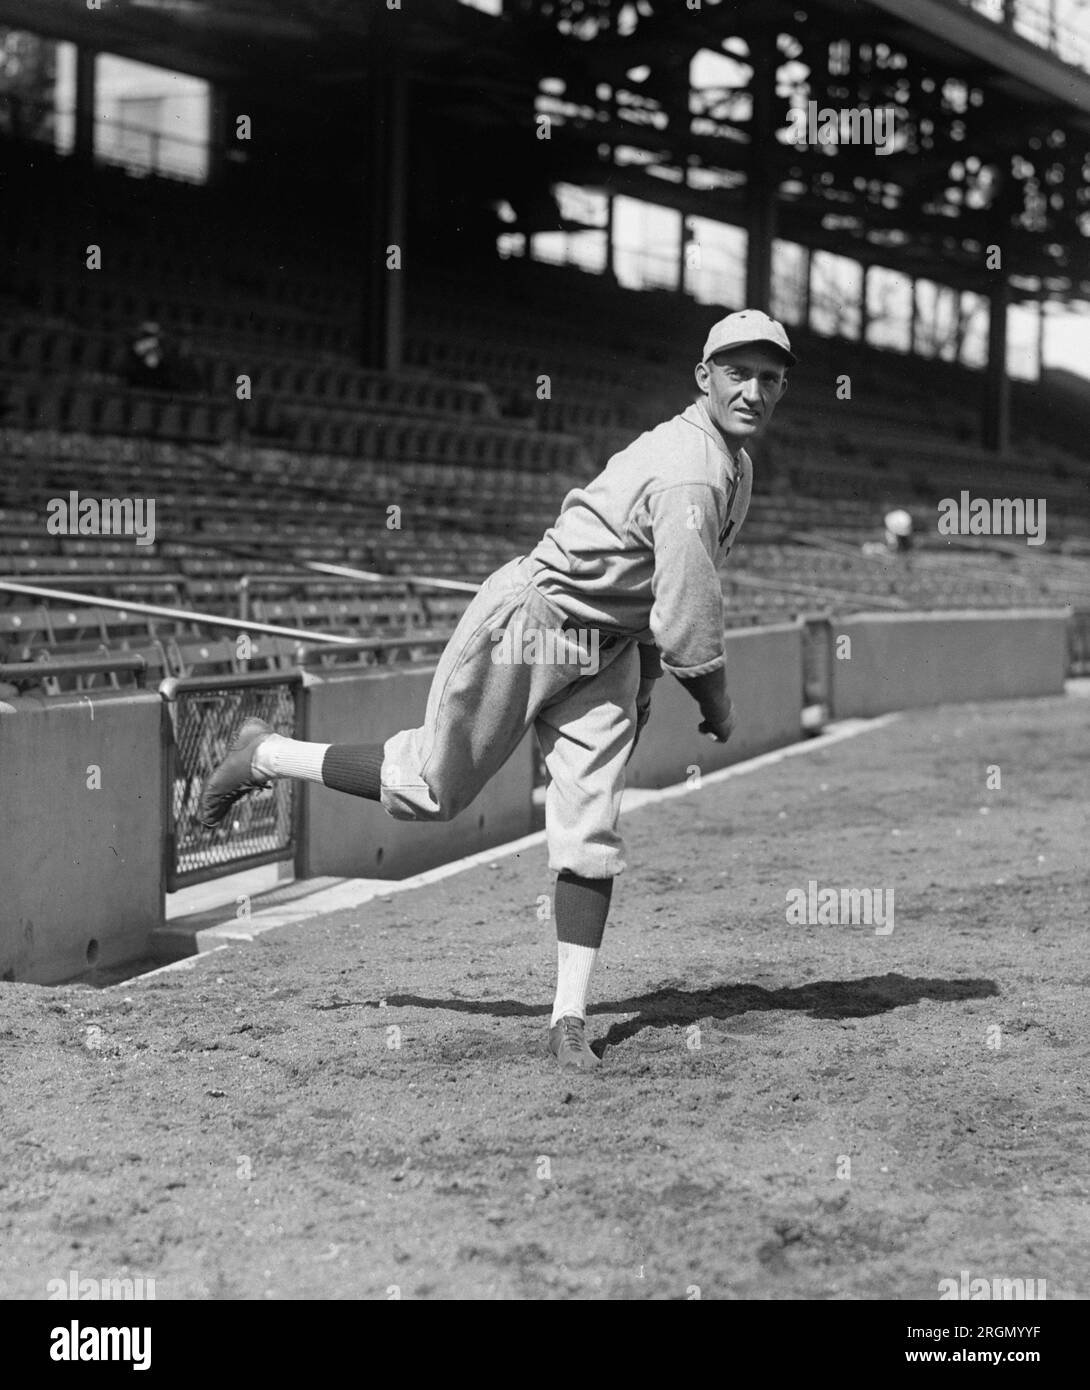 George Stovall, St. Louis Browns, 1912 Stock Photo - Alamy